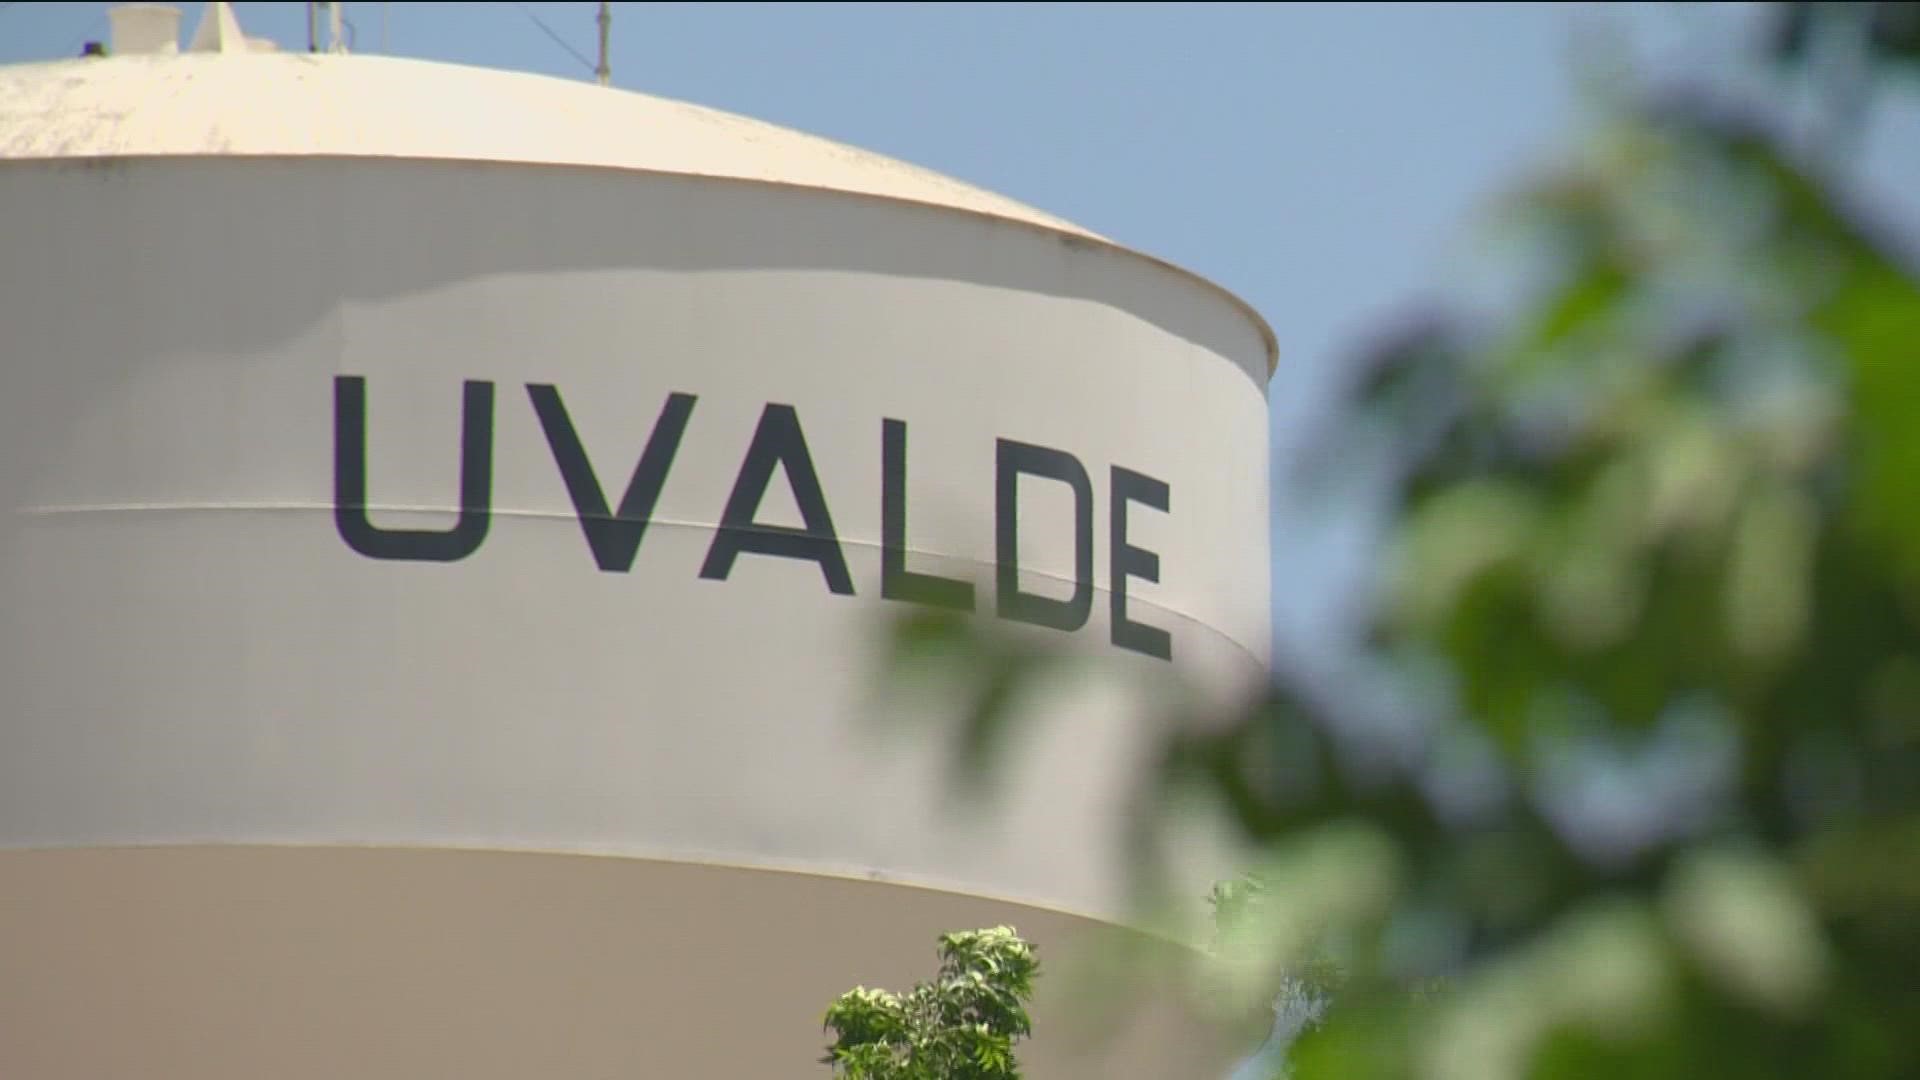 The 77-page Uvalde committee report detailed the violent tendencies of the shooter and the warning signs that were ignored.